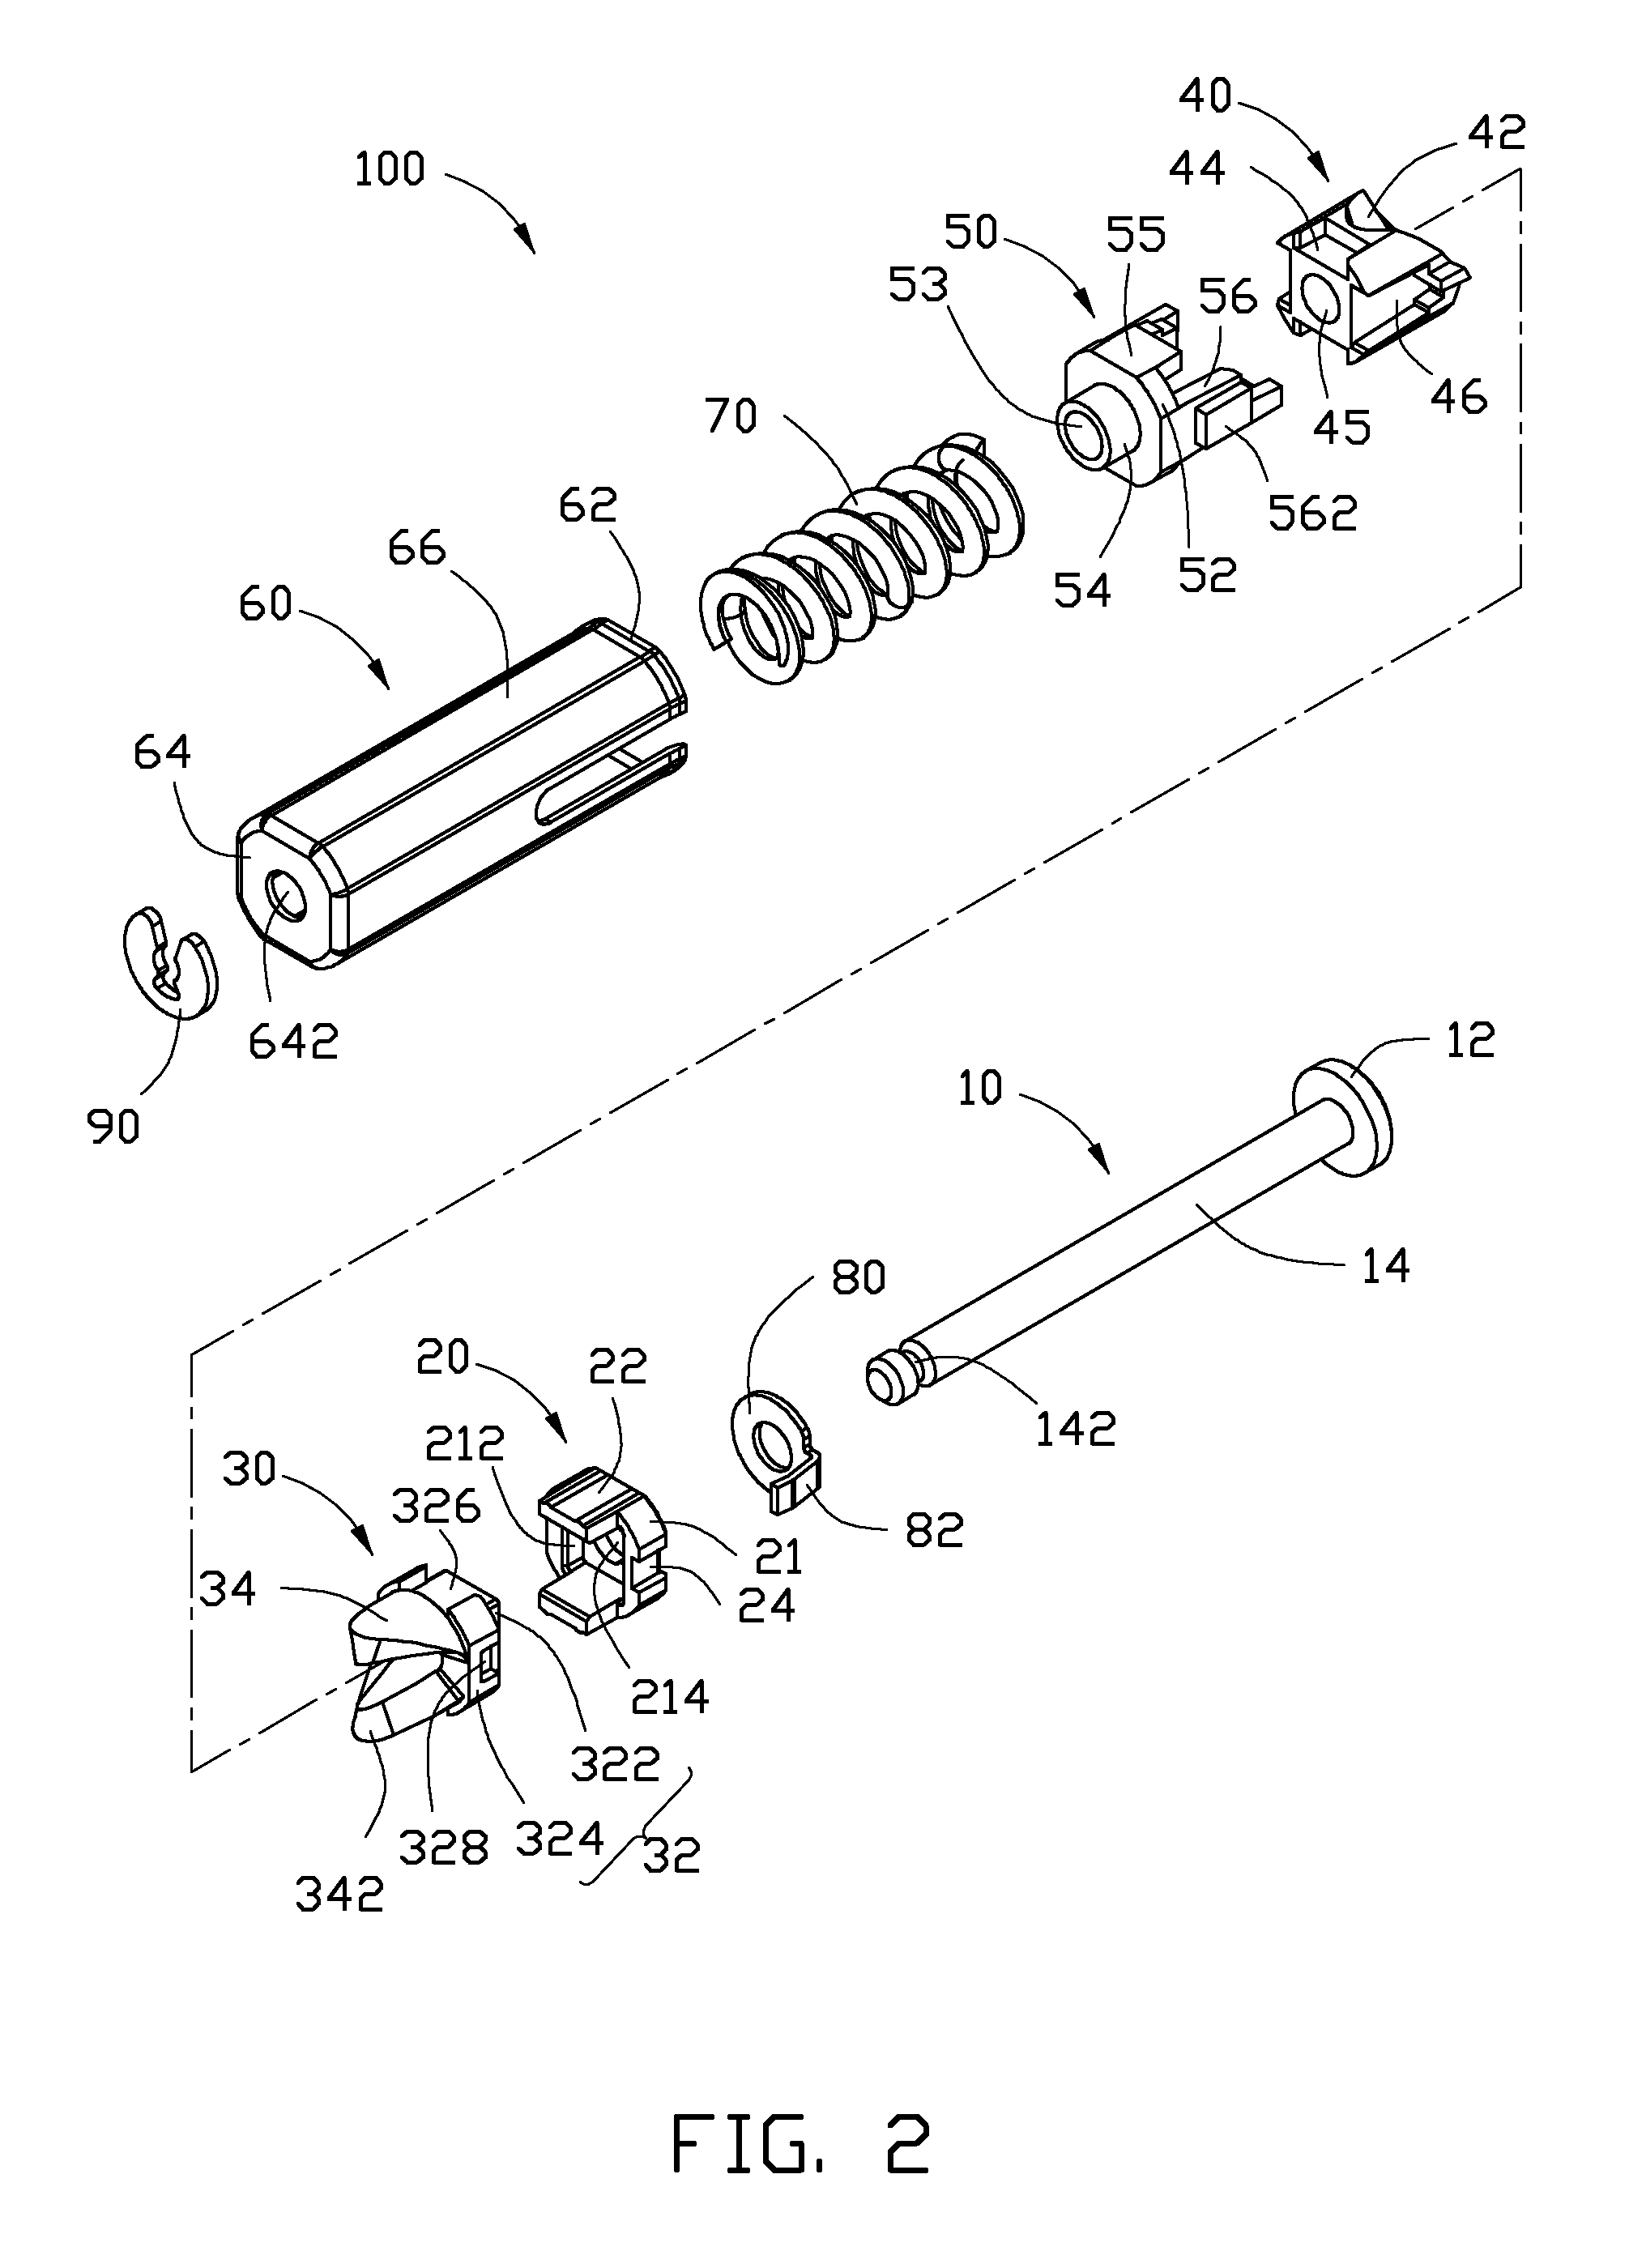 Hinge assembly for foldable electronic device